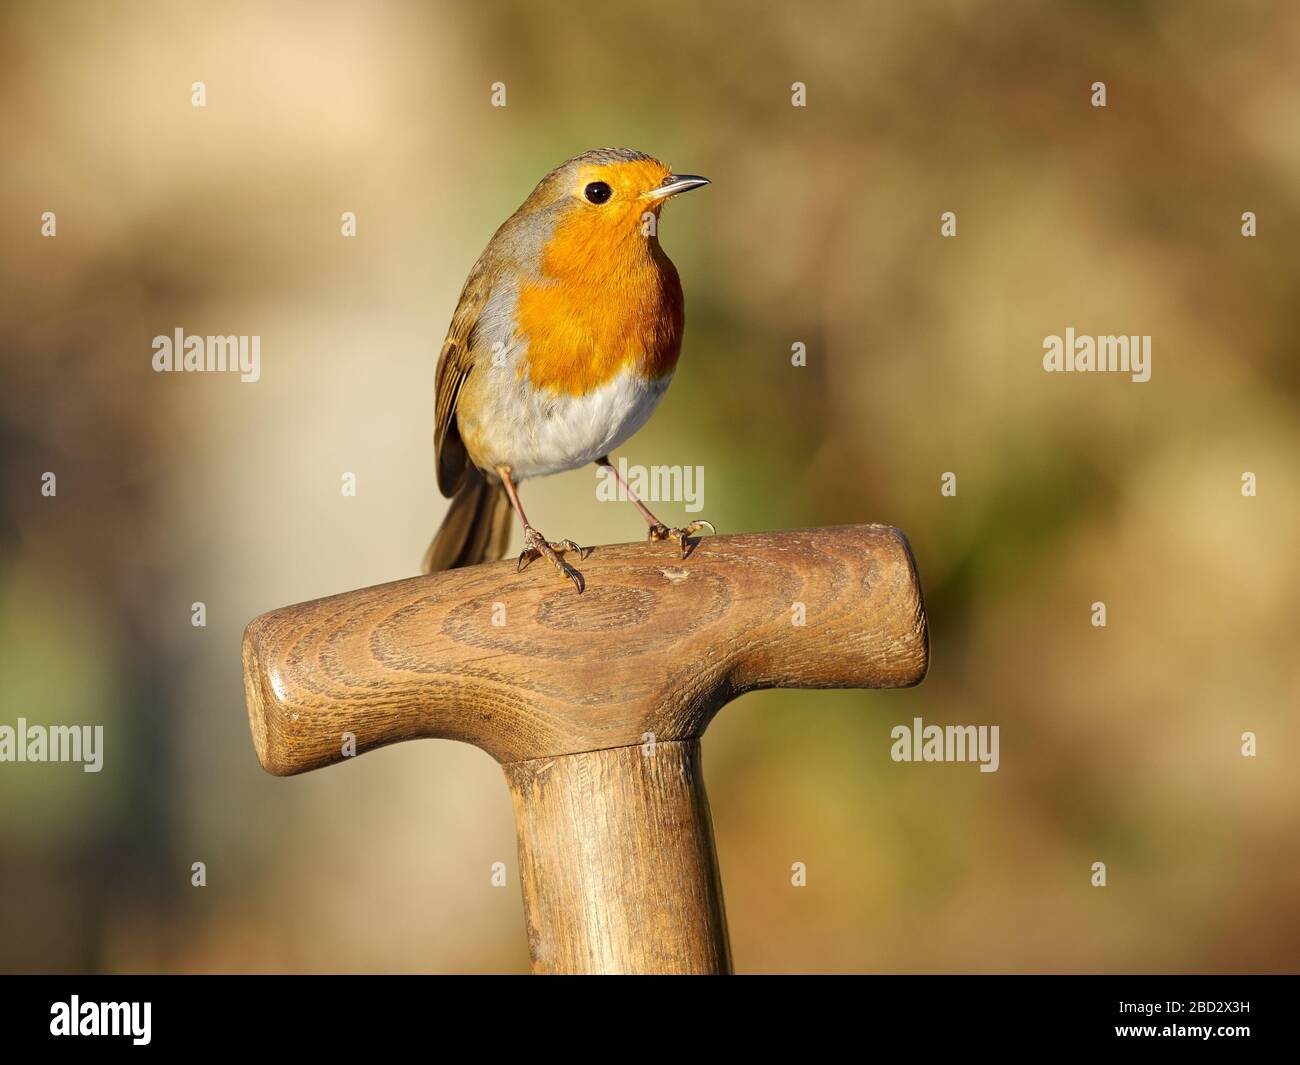 Robin perched on a on wooden garden fork handle Stock Photo